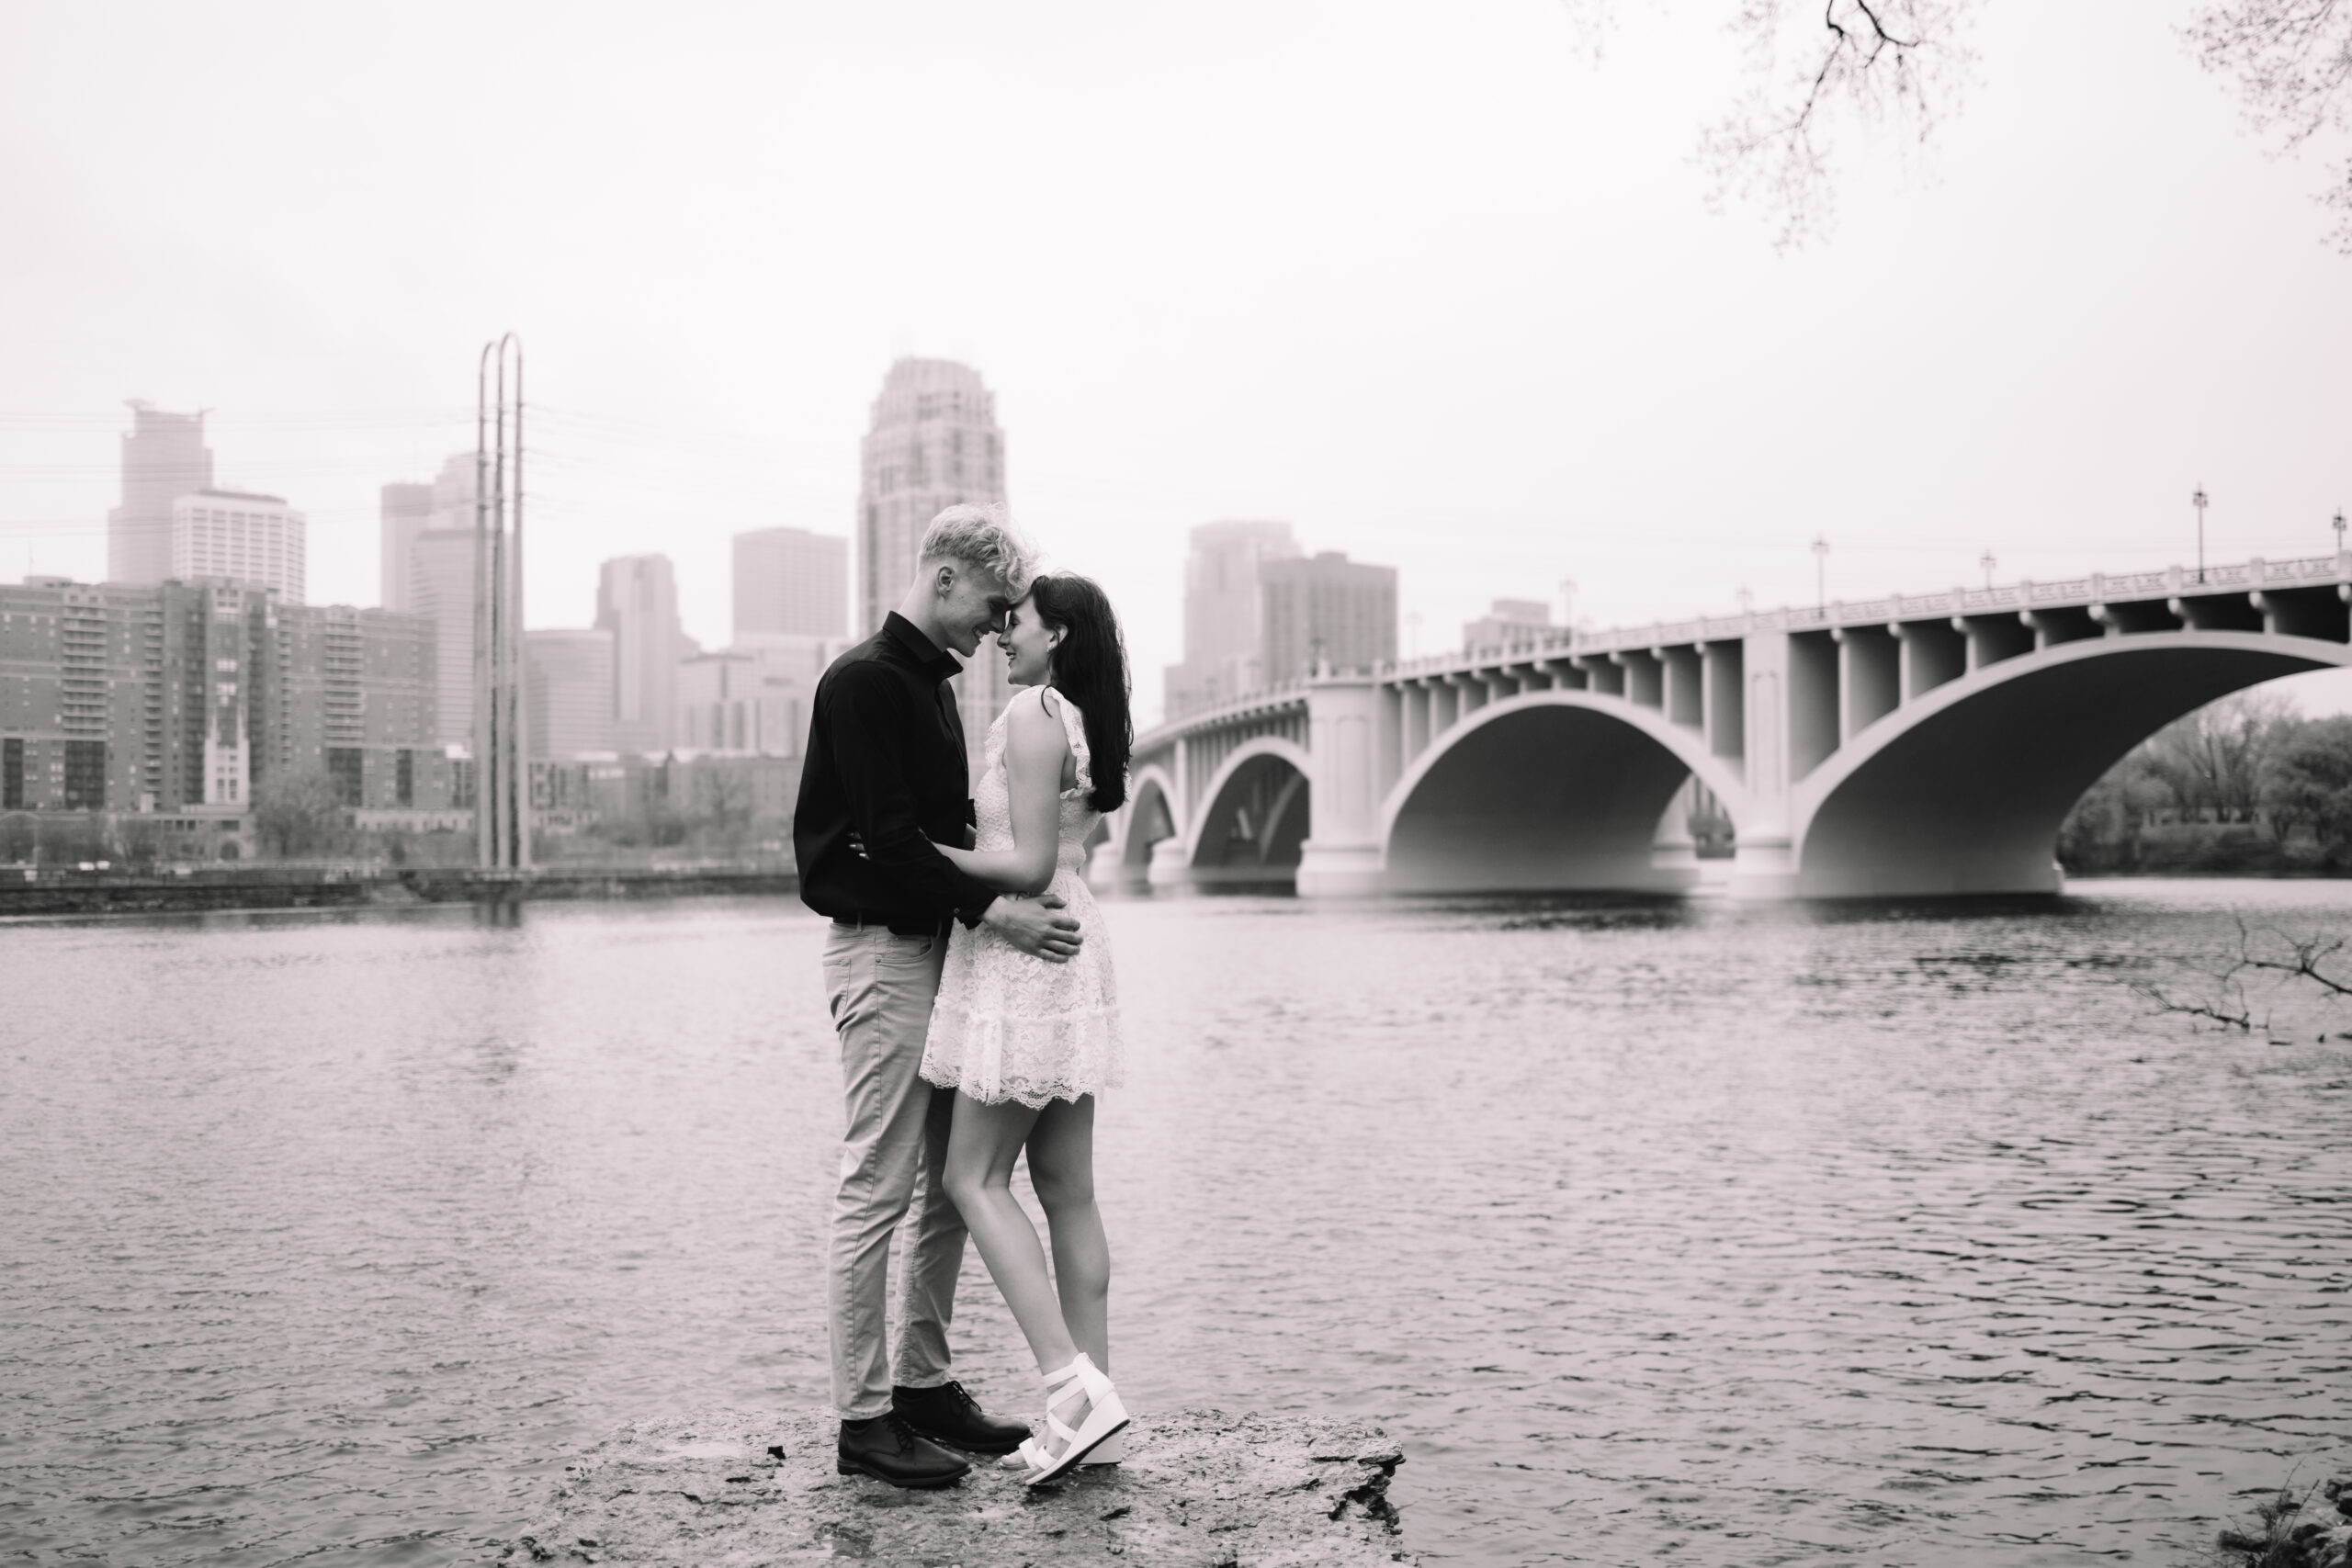 A couple stands on a rock by a river, embracing and kissing, with a city skyline and a bridge in the background.